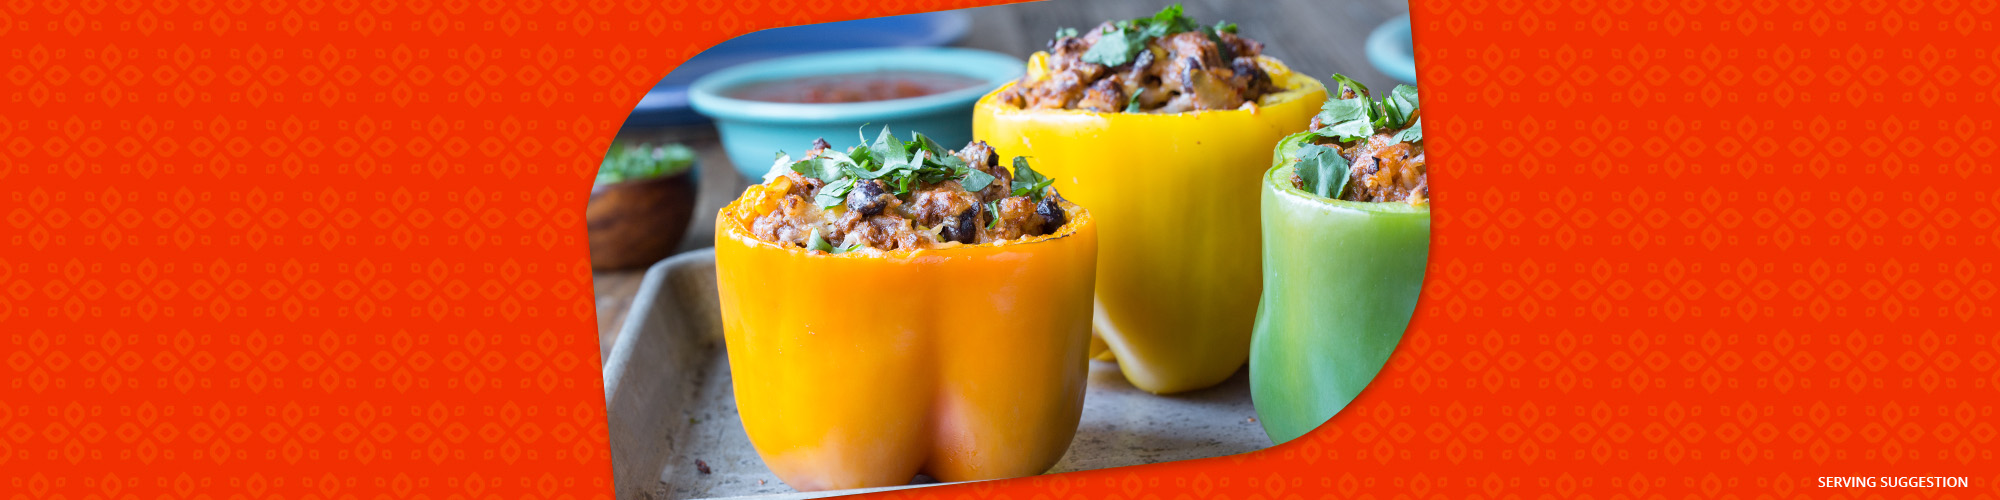 Salsas mexican stuffed bell peppers